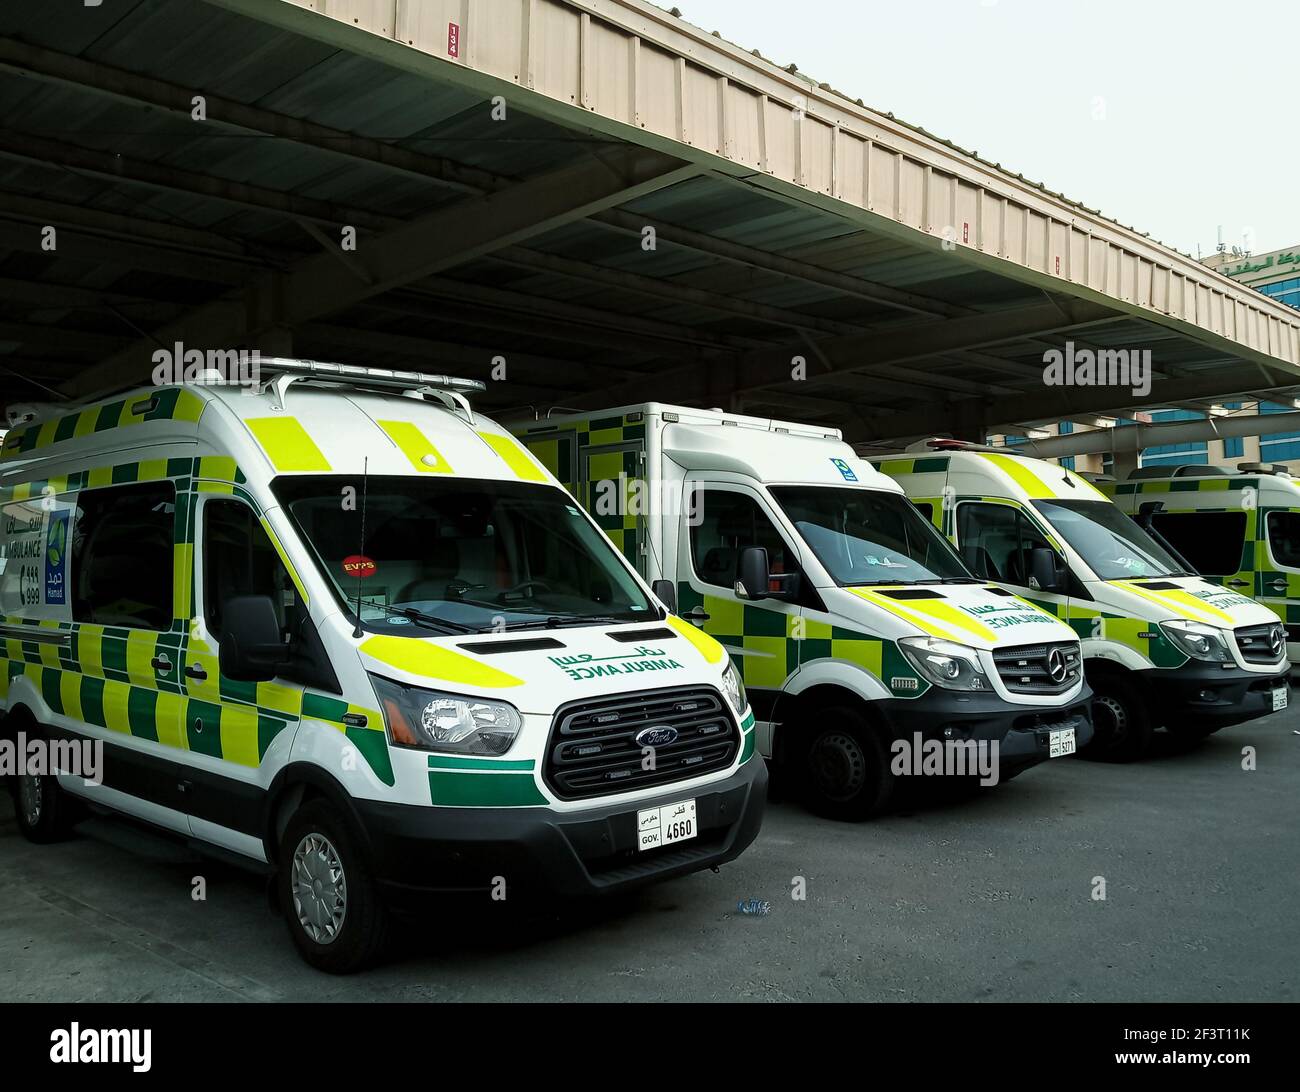 A view of government Hospital Ambulance in Doha, Qatar Stock Photo